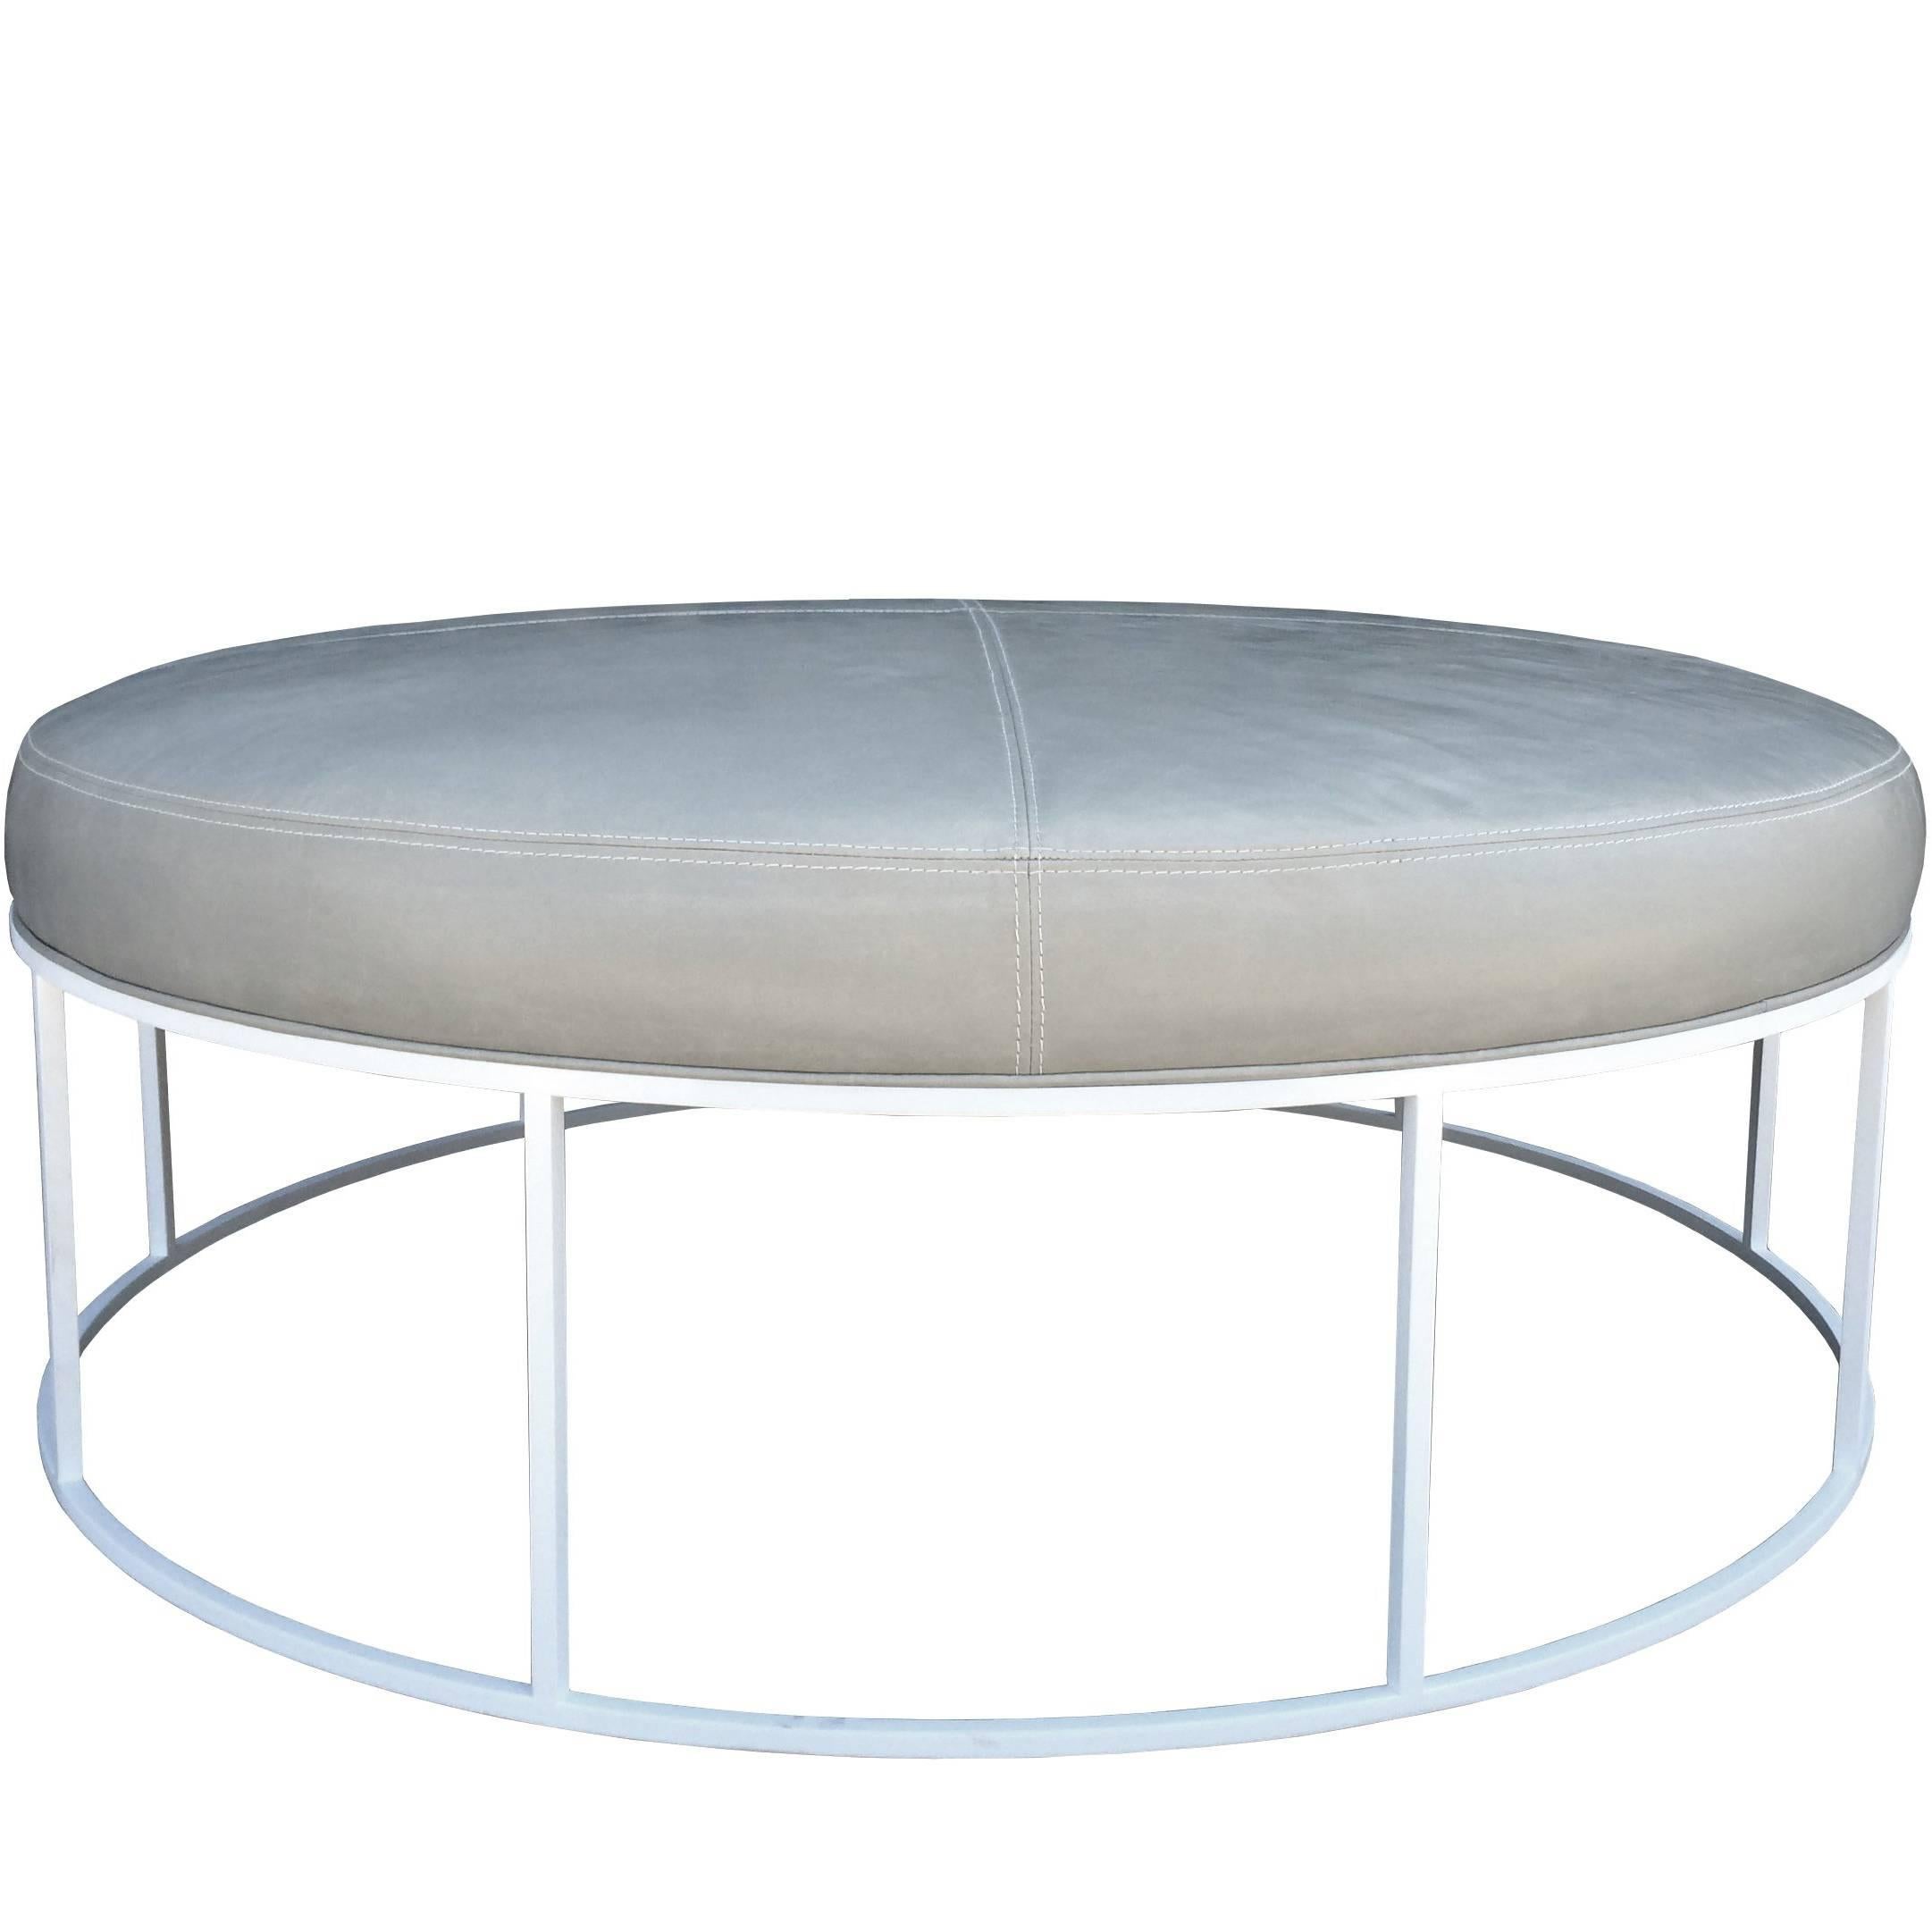 Stunning Custom Designed Round Ottoman with White Lacquered Base and Leather Top